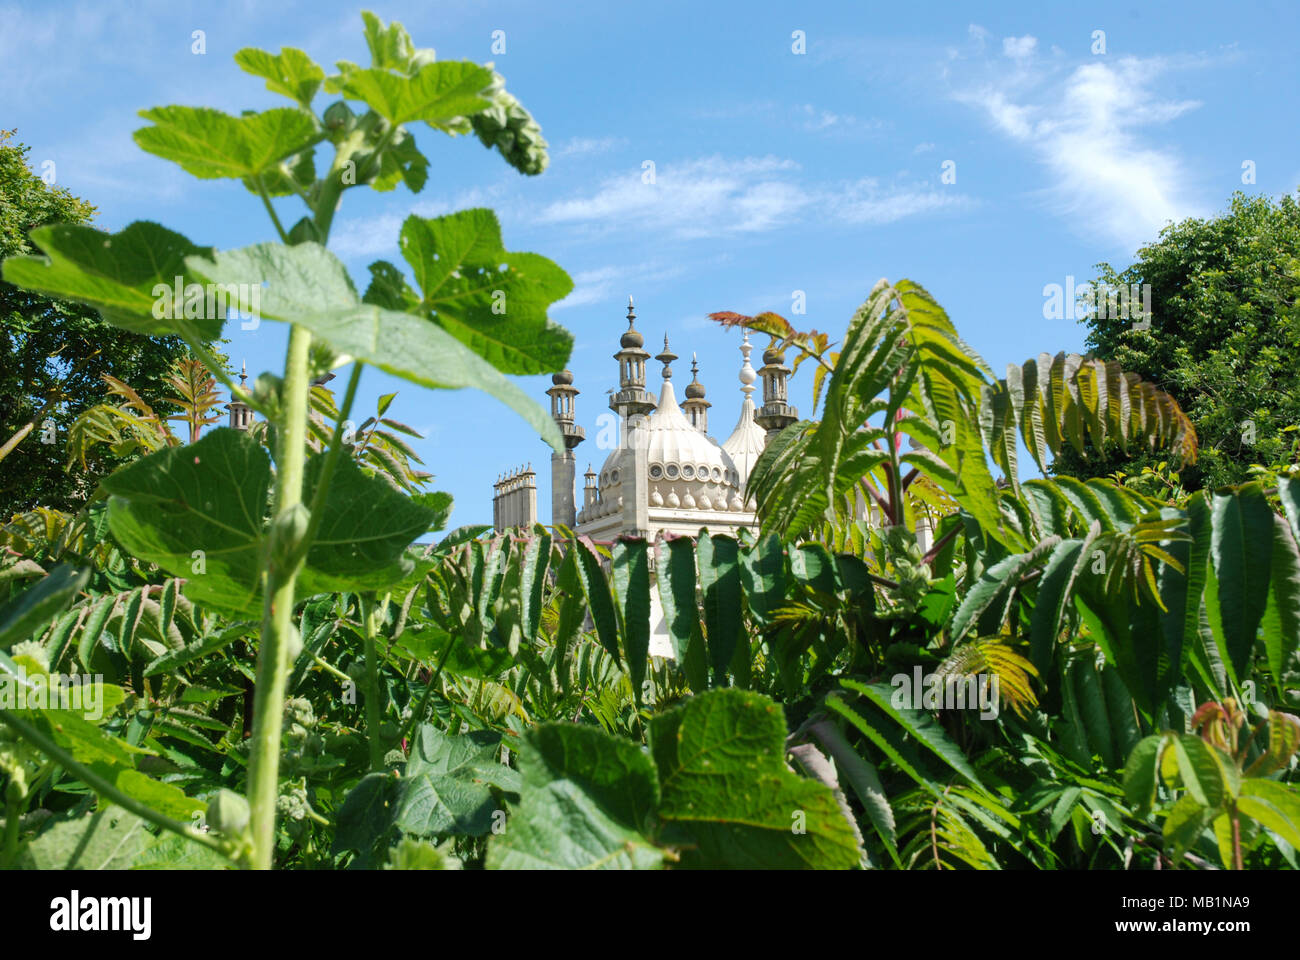 Brighton Pavilion or The Royal Pavilion behind bushes and trees Stock Photo